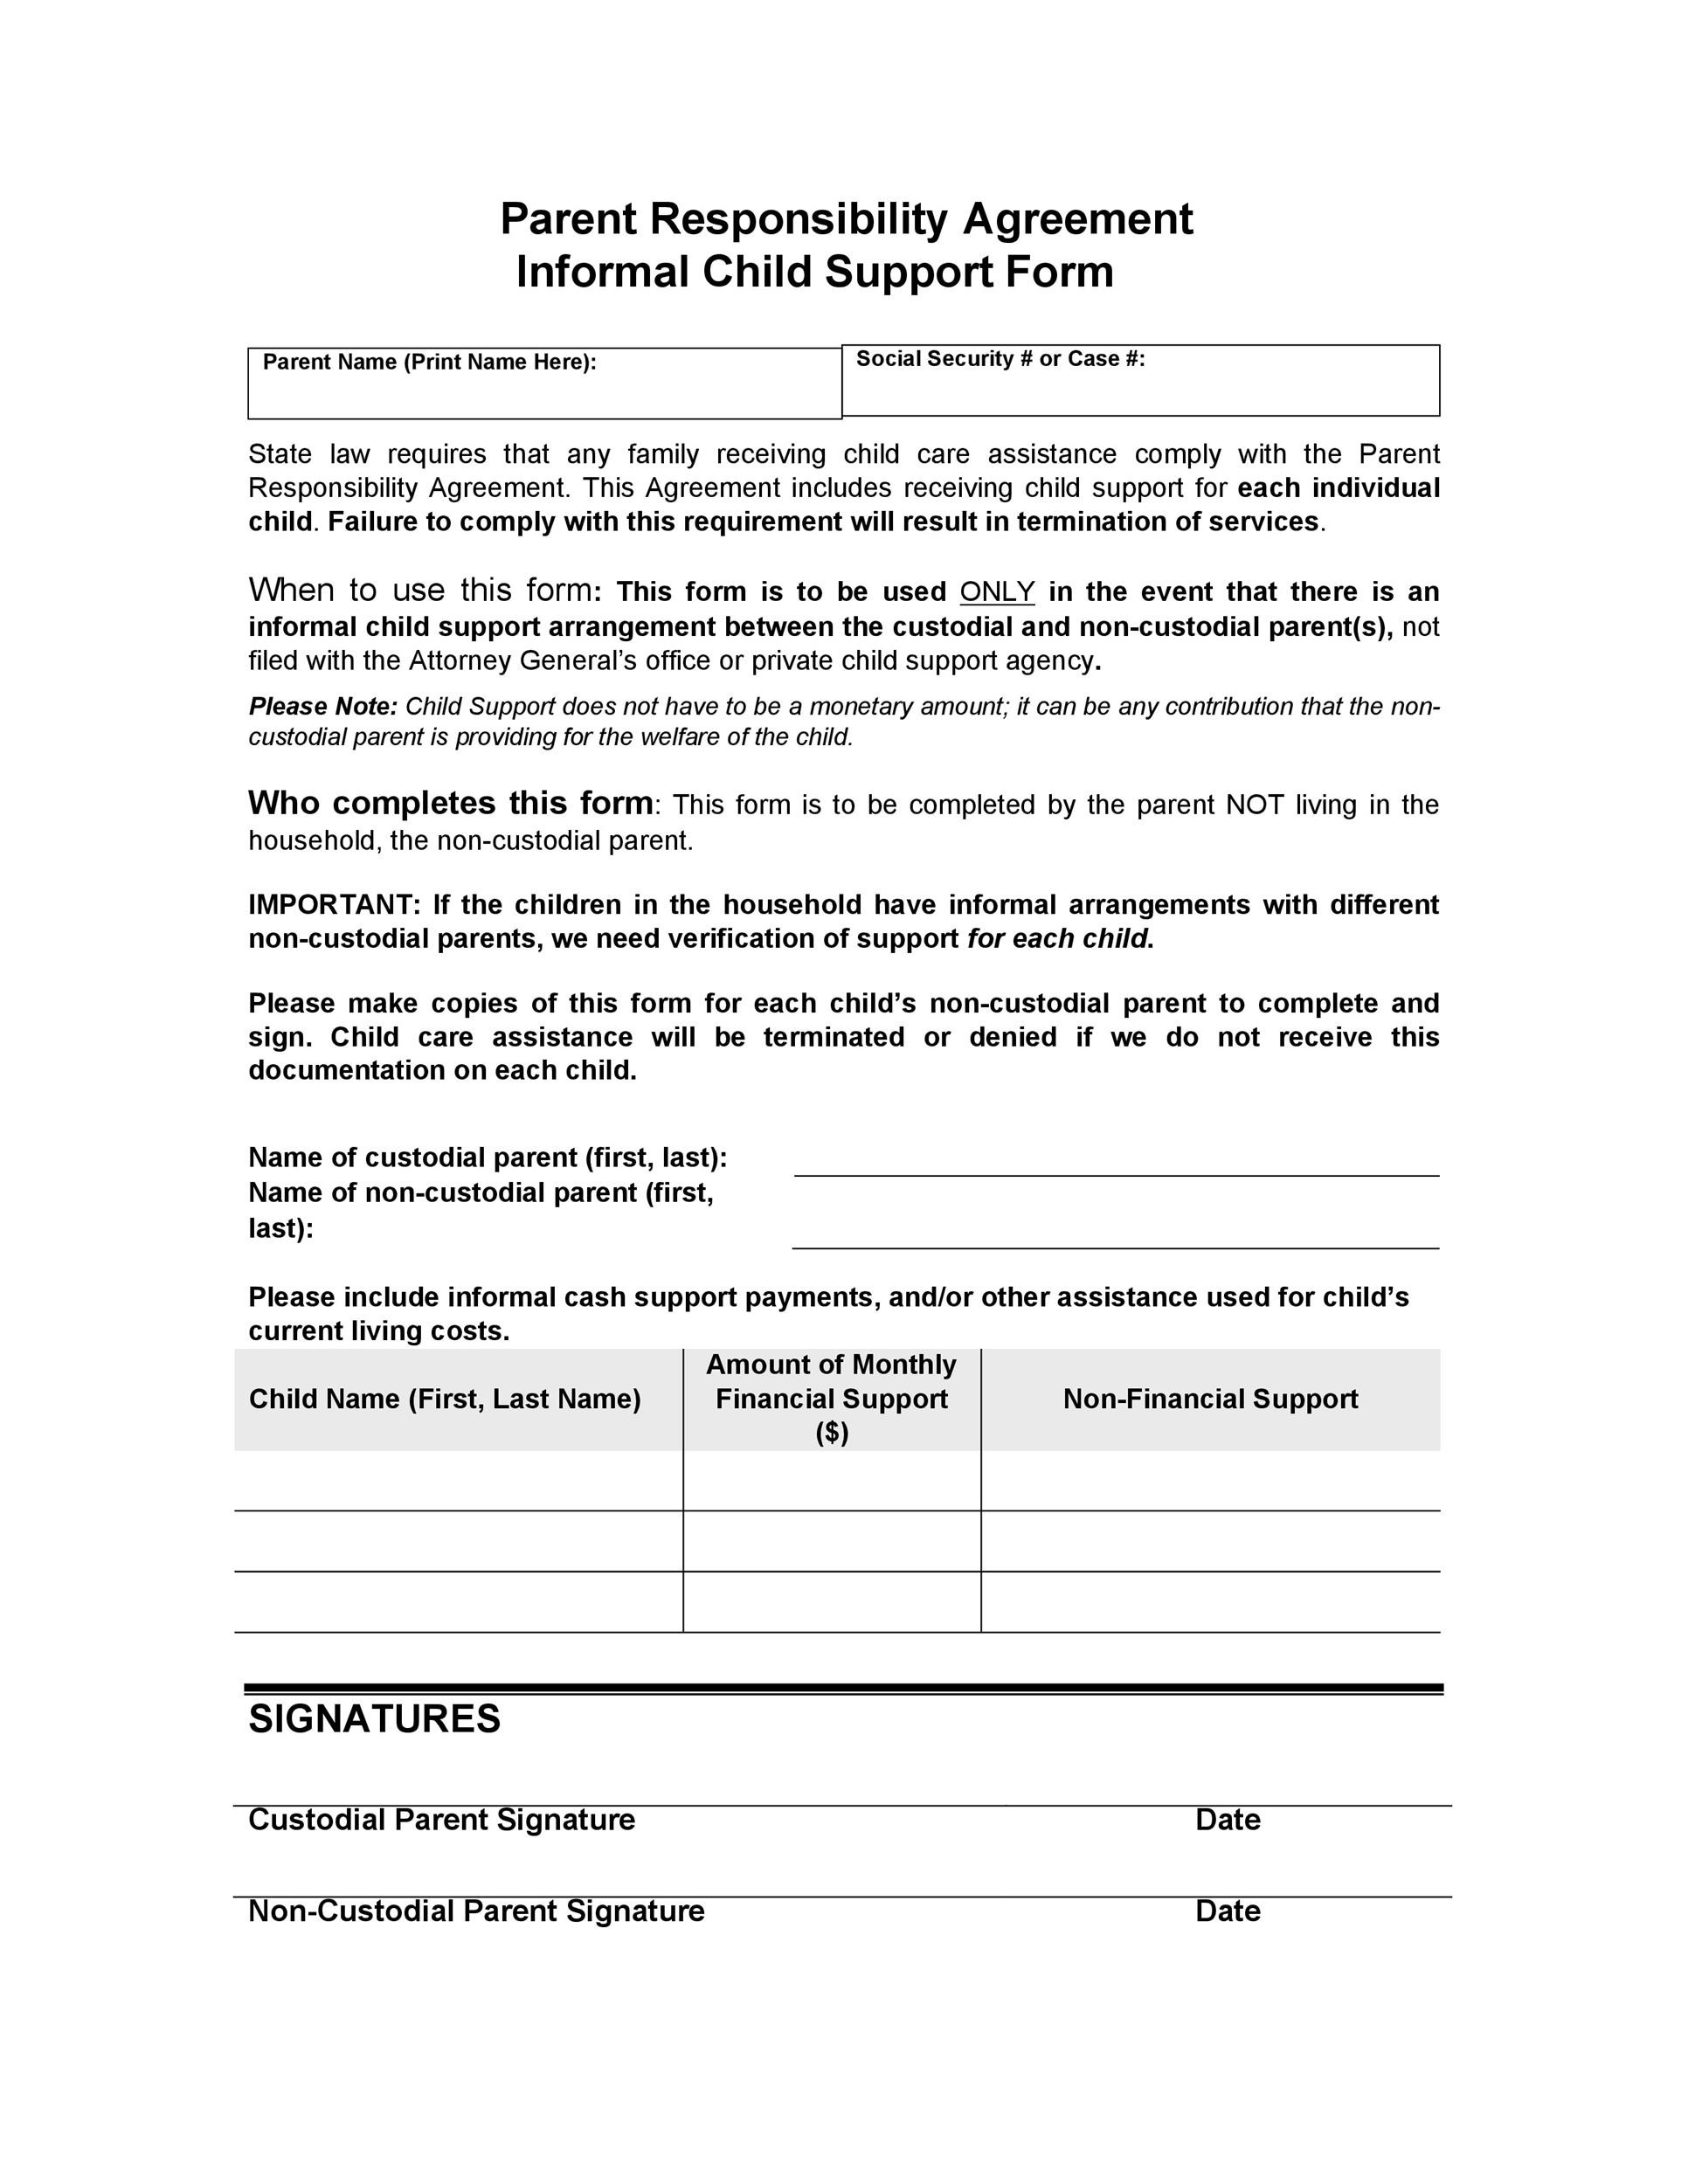 Child Support Agreement Letter from templatelab.com